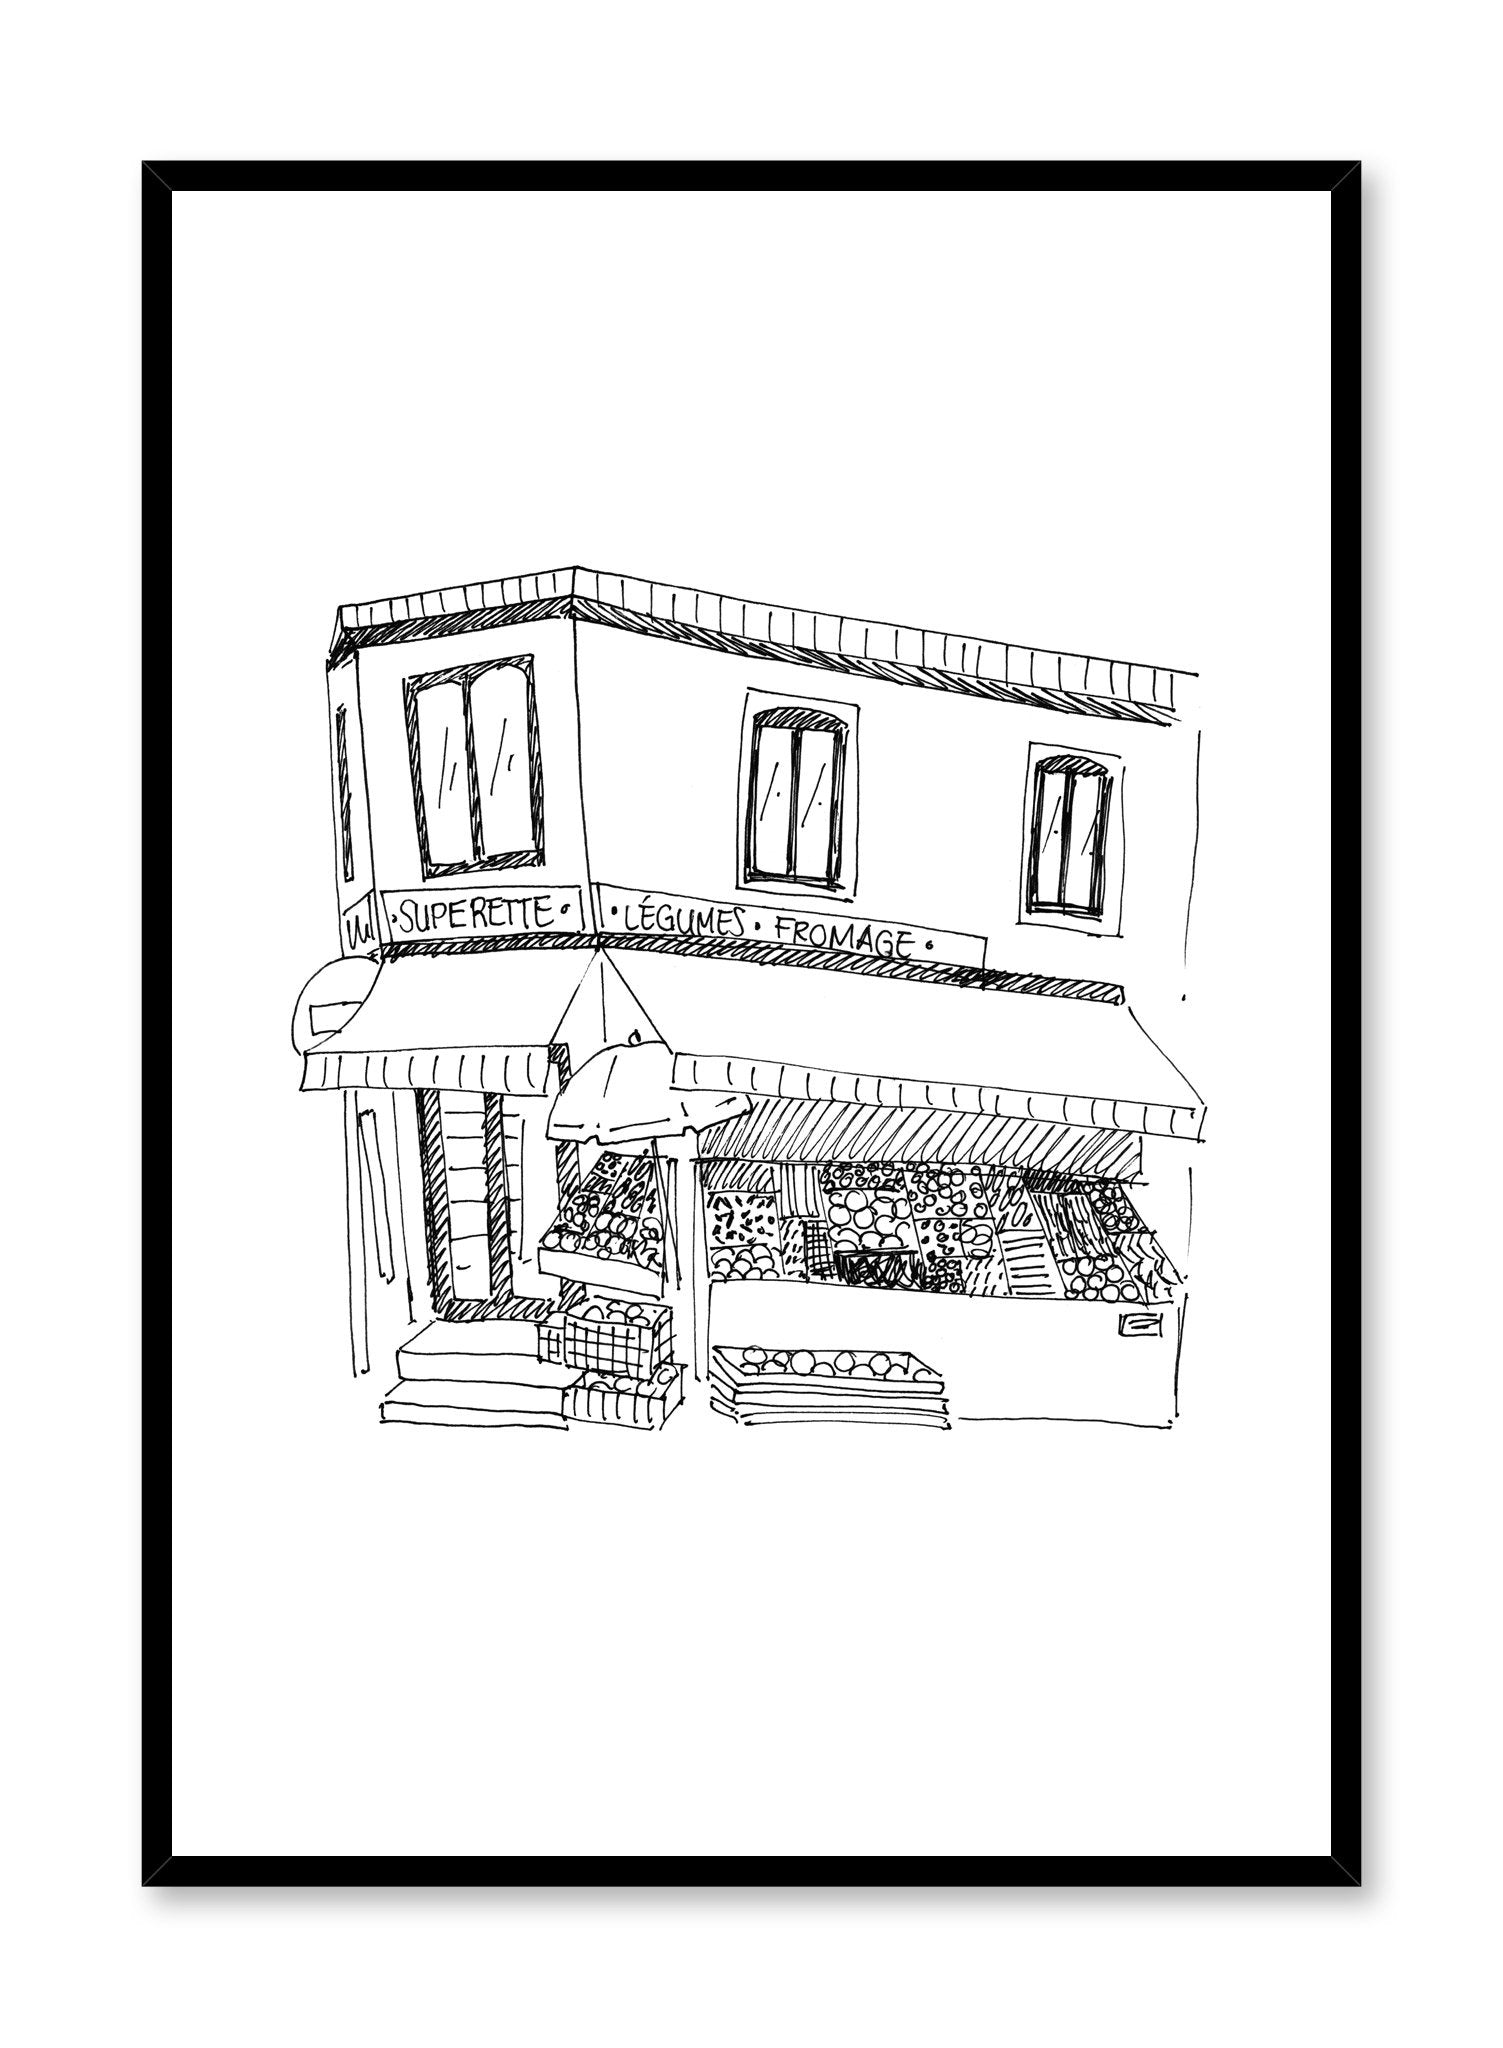 Minimalist poster by Opposite Wall with Corner Store black and white illustration